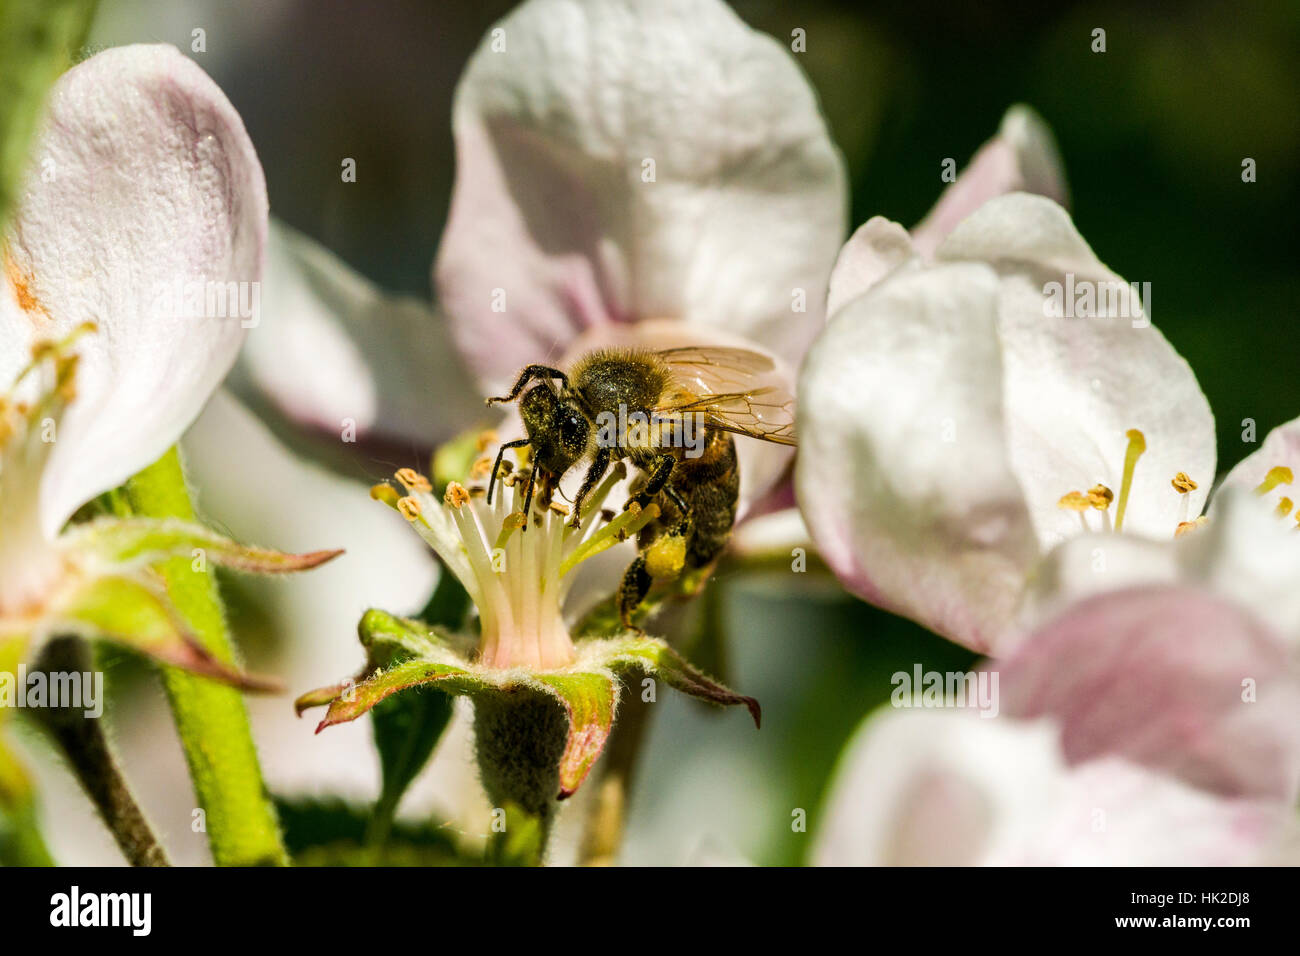 A Carniolan honey bee (Apis mellifera carnica) is collecting nectar at a white apple tree blossom Stock Photo